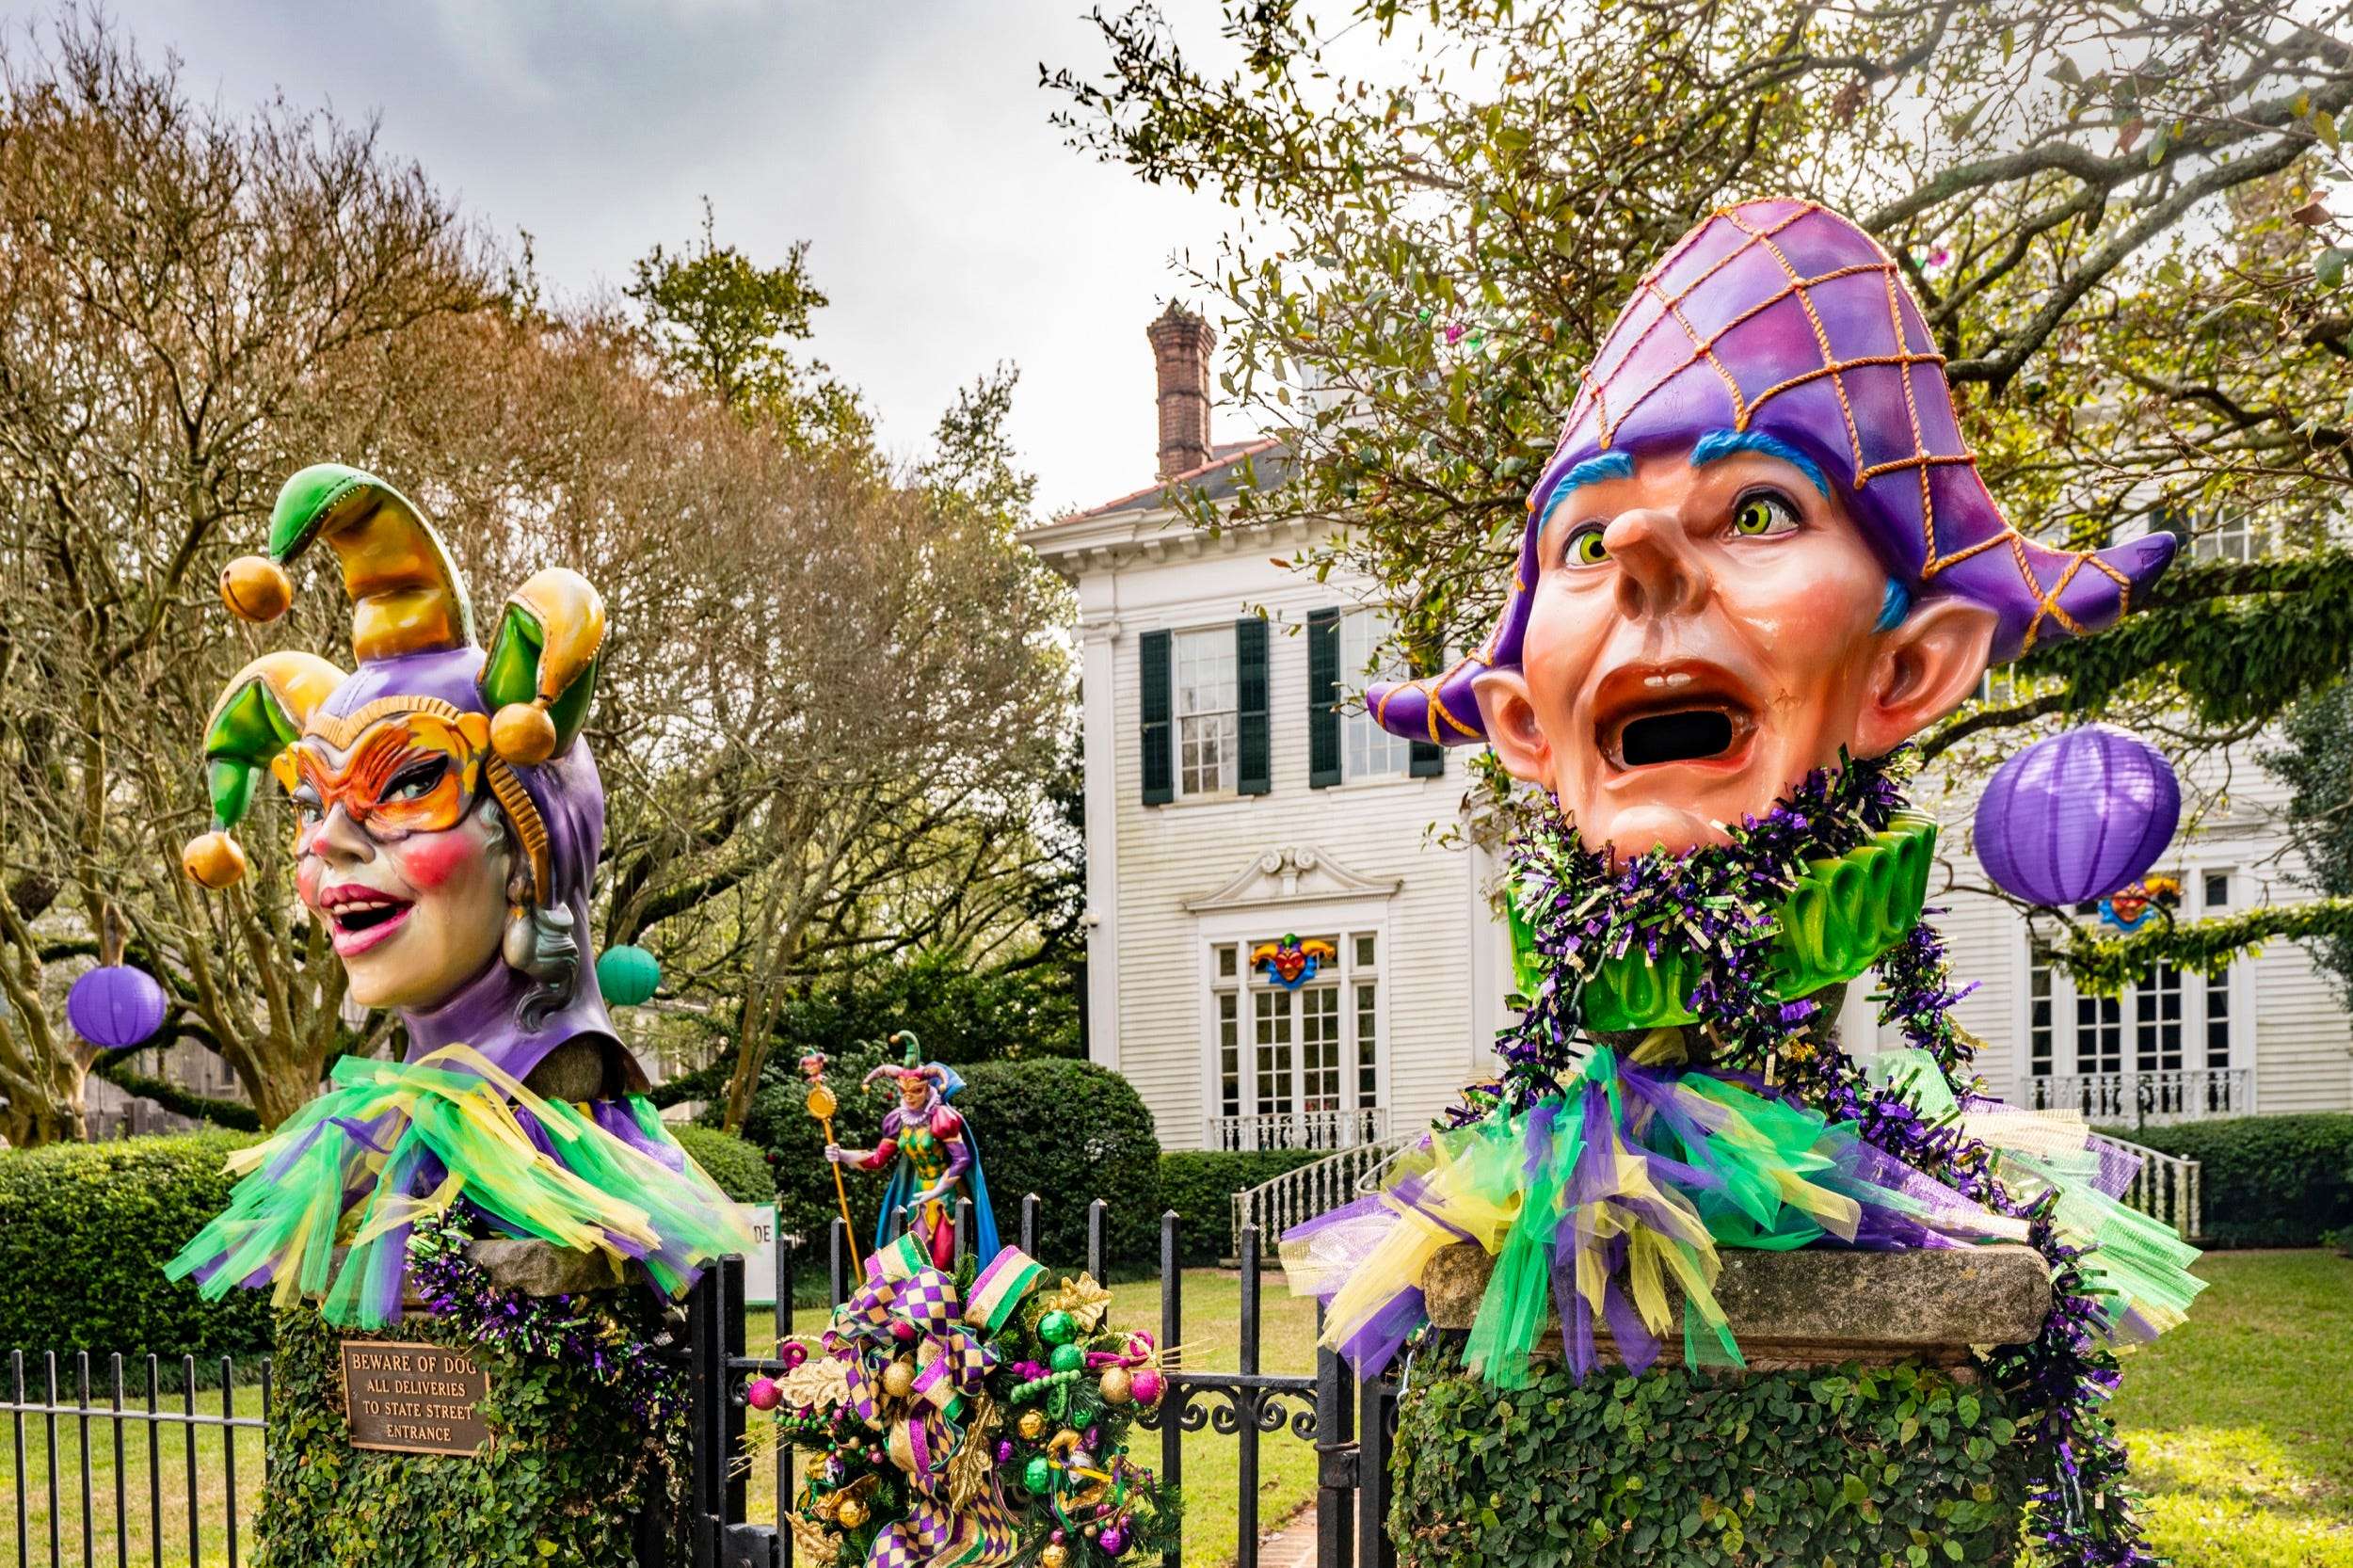 Mardi Gras was canceled for the first time in decades - so ...